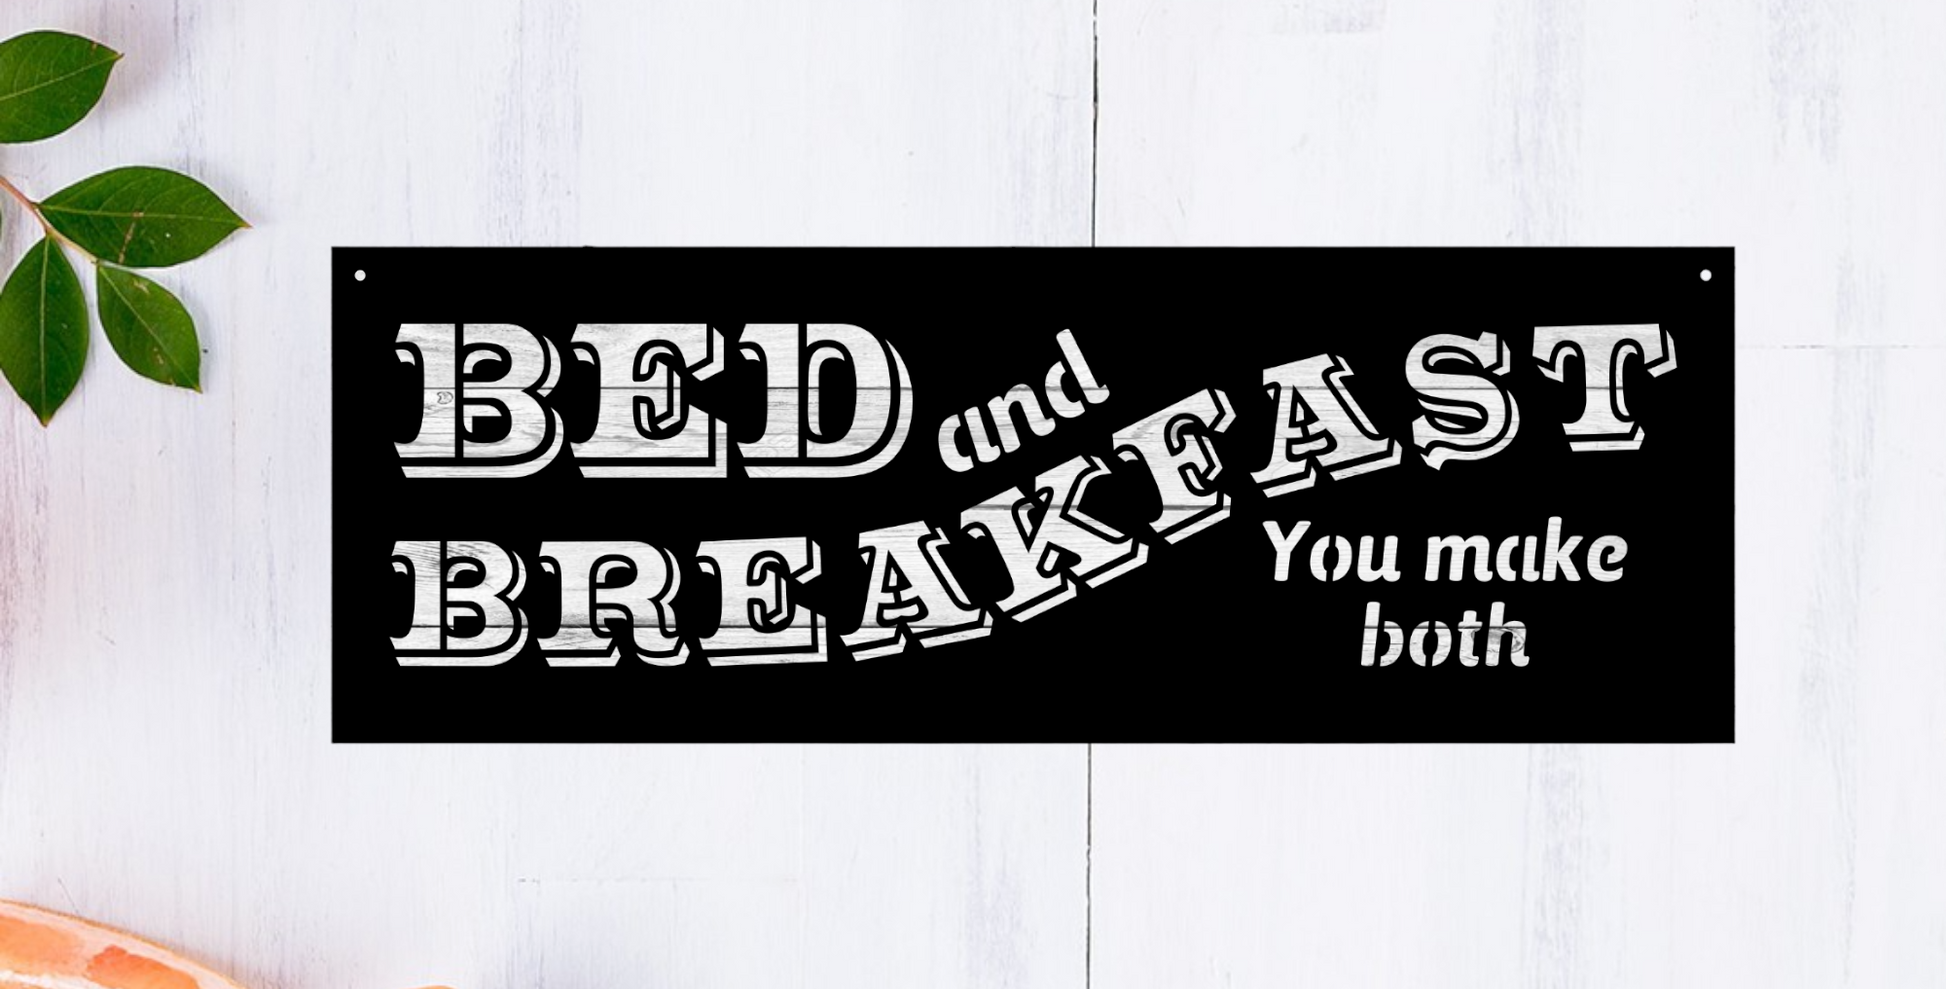 Bed & Breakfast, You make Both Home Décor